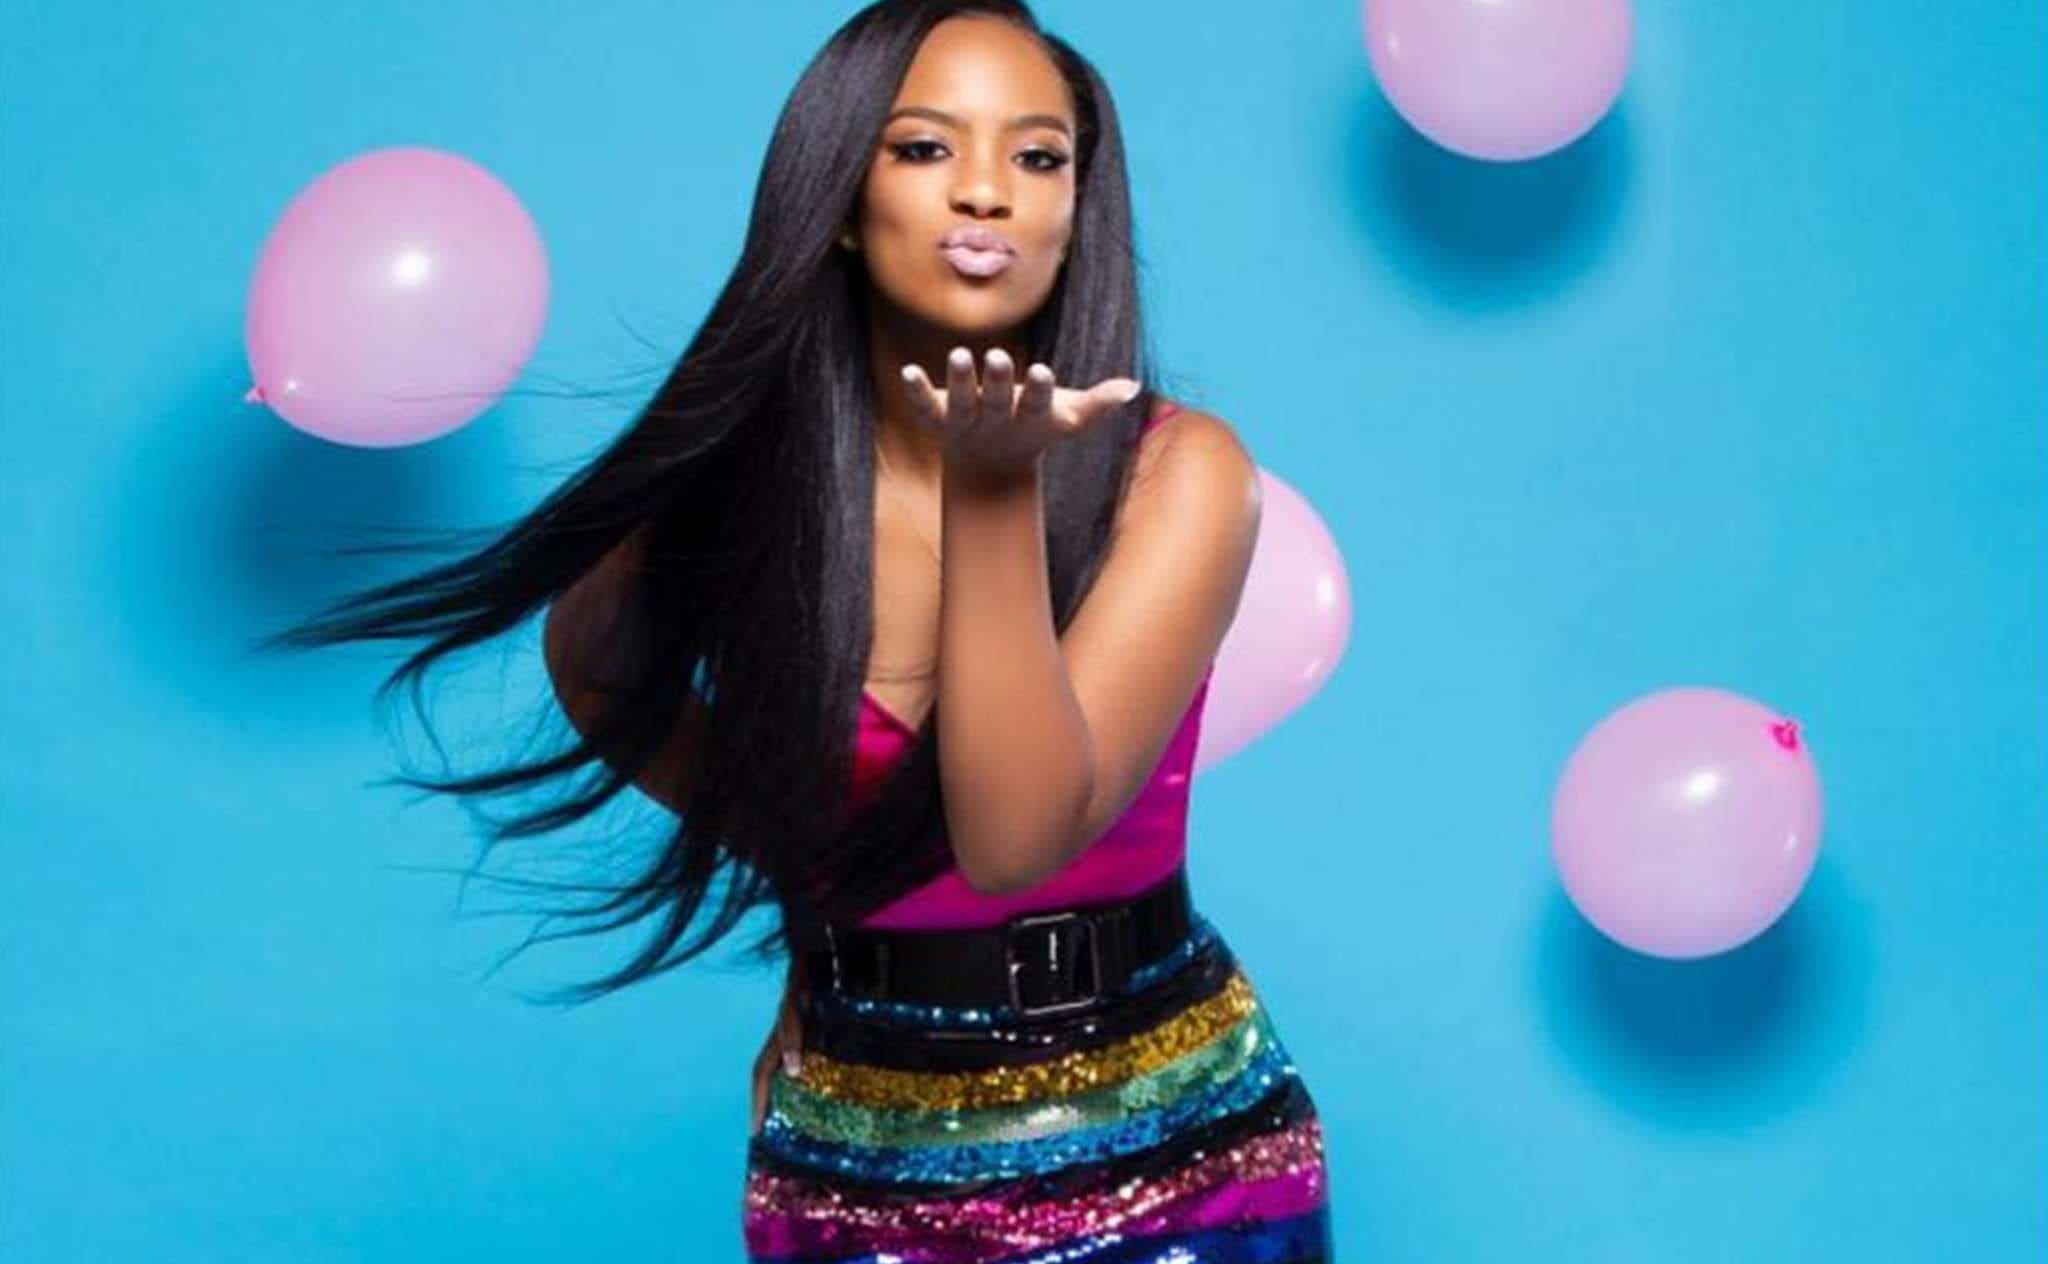 Kandi Burruss' Daughter, Riley Burruss Is Proud To See That Most Of Her Mom's Top Nine Pics Are Of Her